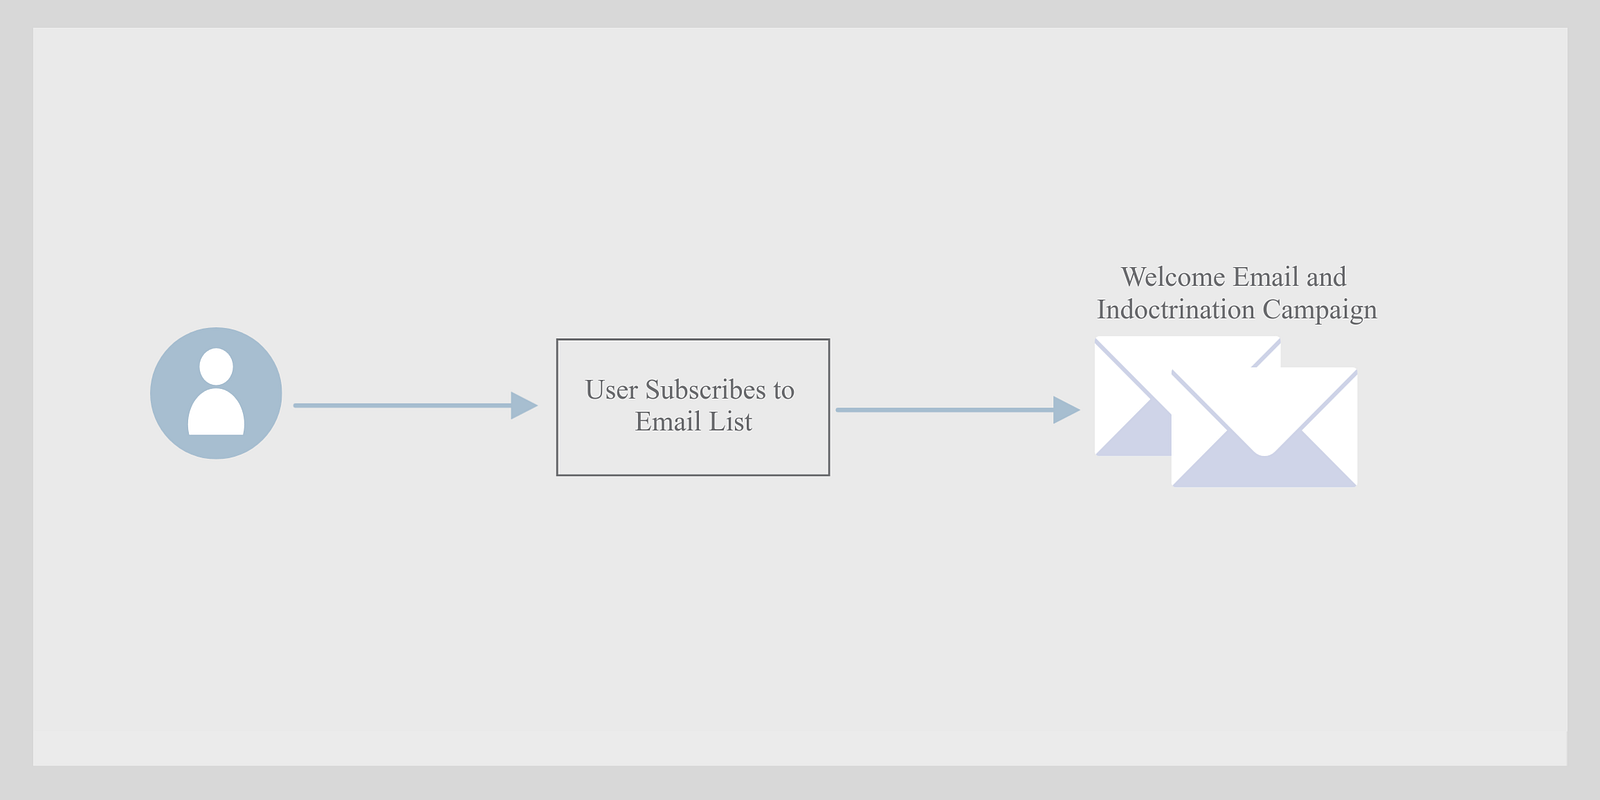 User, user subscribes to email list, welcome email and indoctrination campaign.